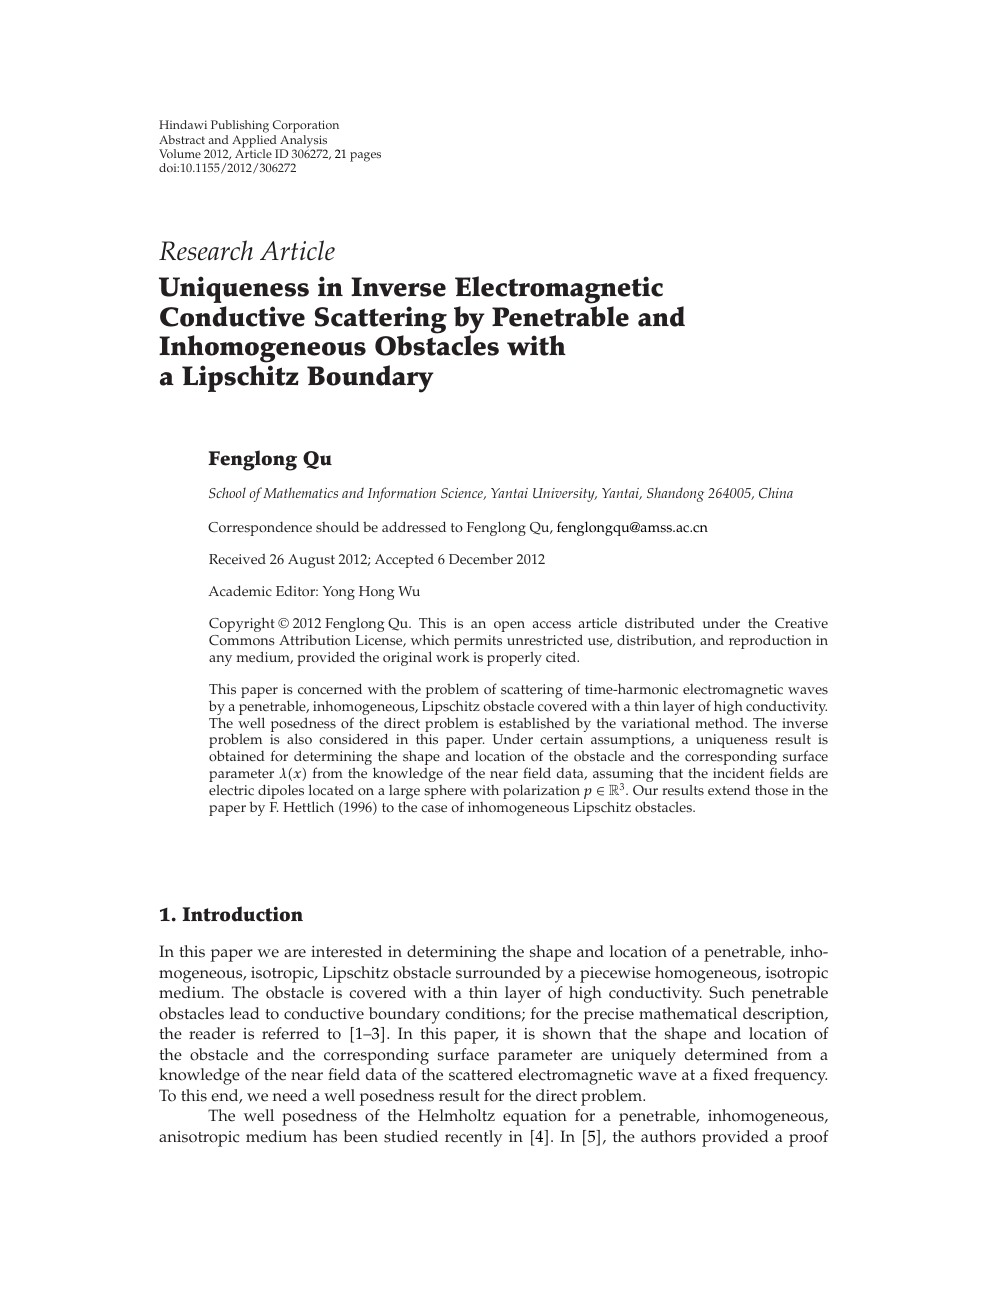 Uniqueness In Inverse Electromagnetic Conductive Scattering By Penetrable And Inhomogeneous Obstacles With A Lipschitz Boundary Topic Of Research Paper In Mathematics Download Scholarly Article Pdf And Read For Free On Cyberleninka